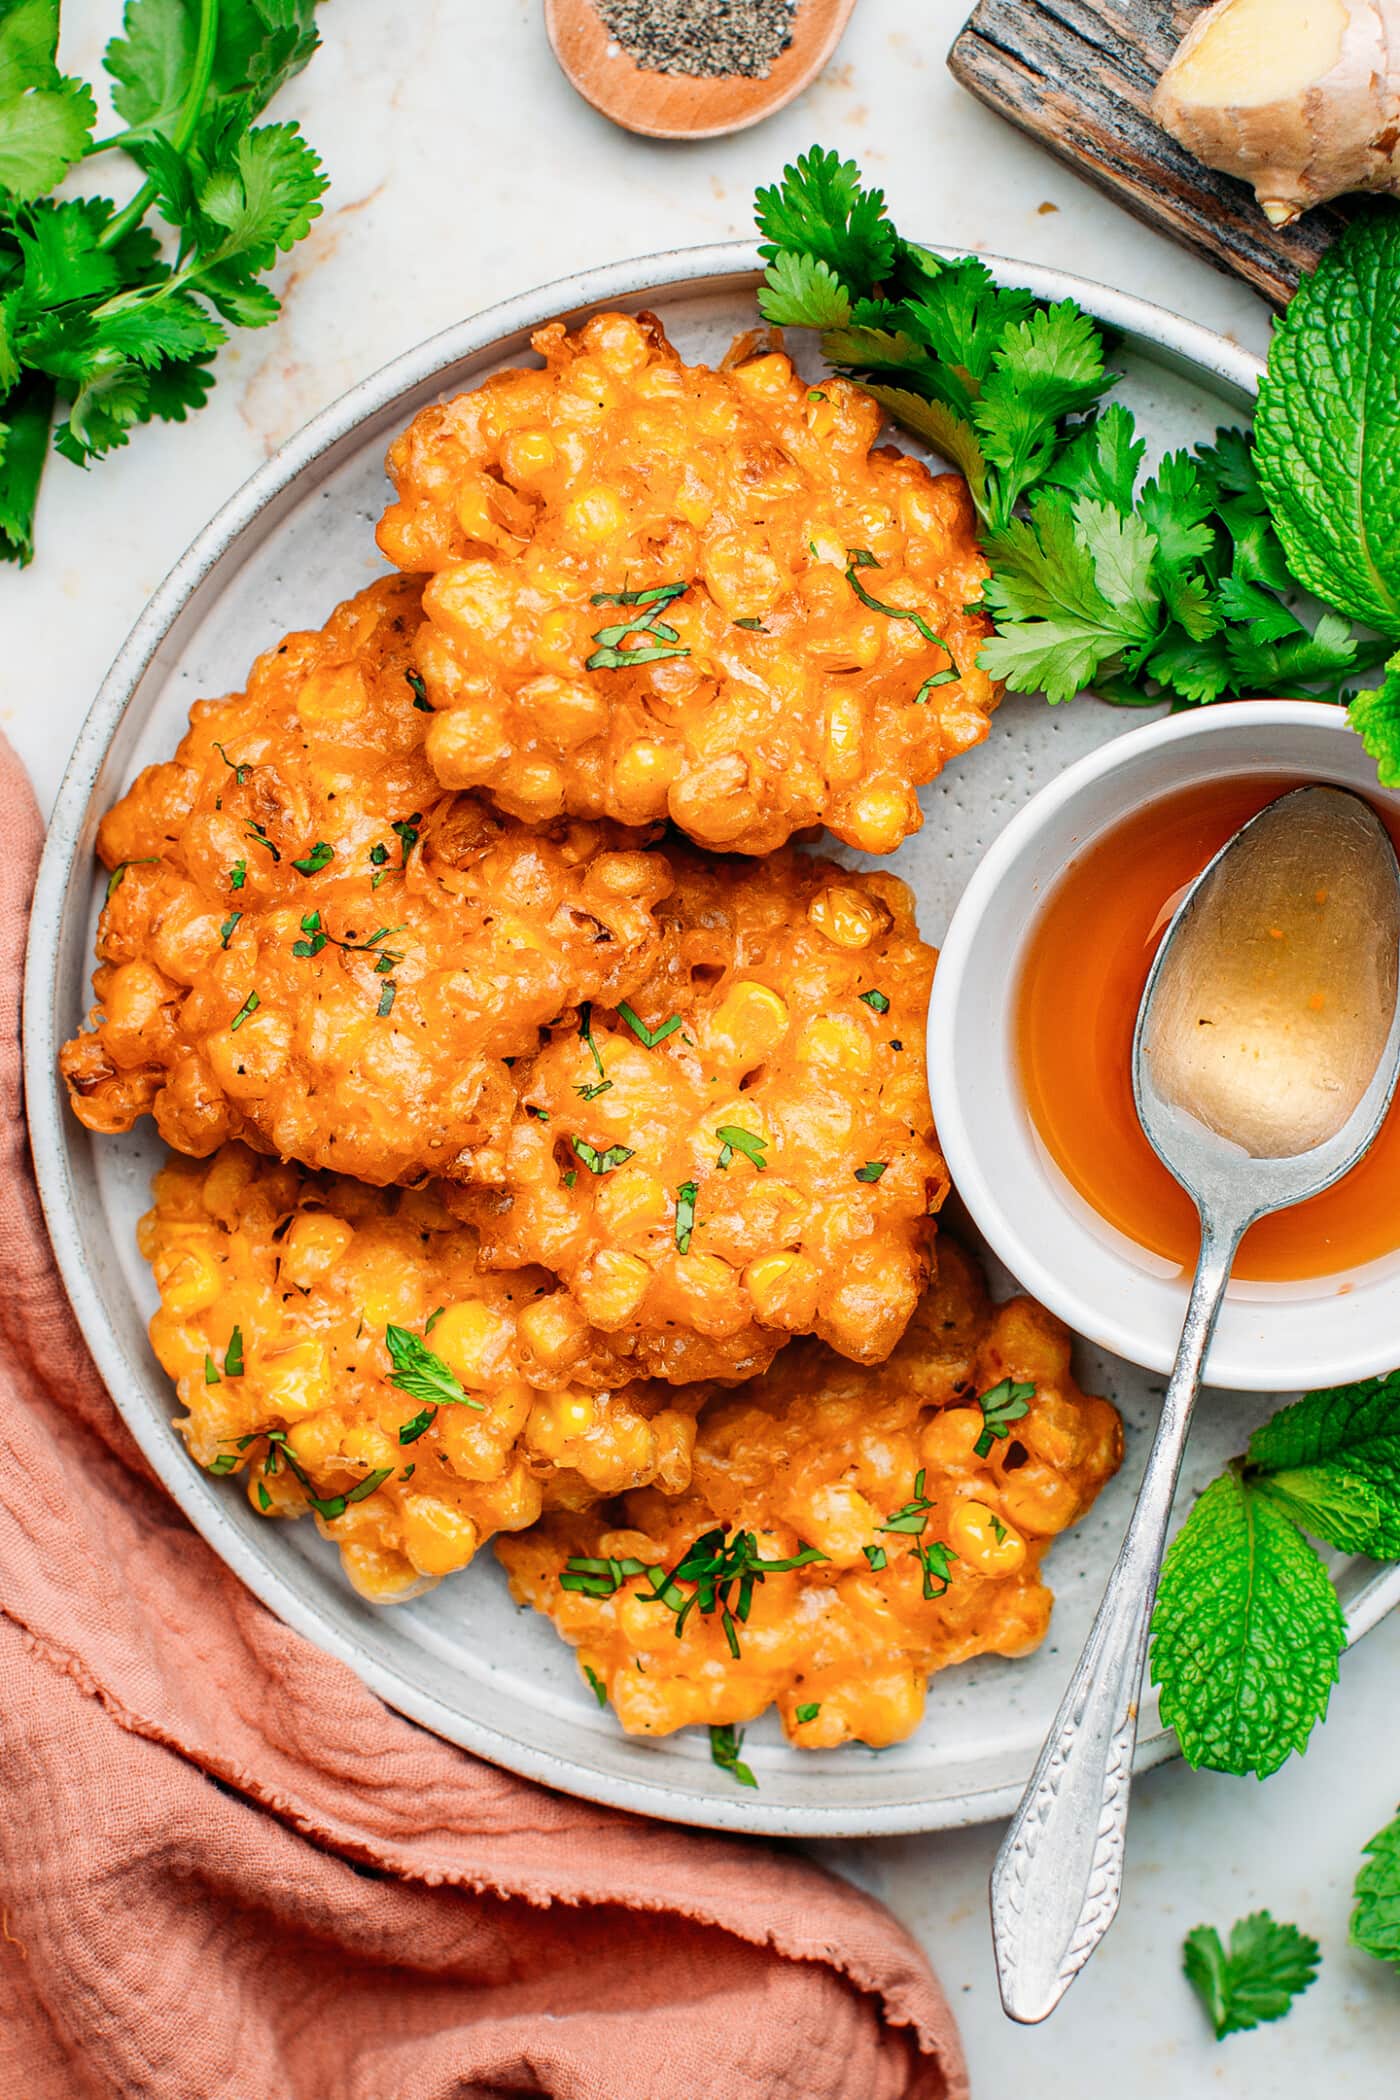 Corn fritters topped with cilantro on a plate.